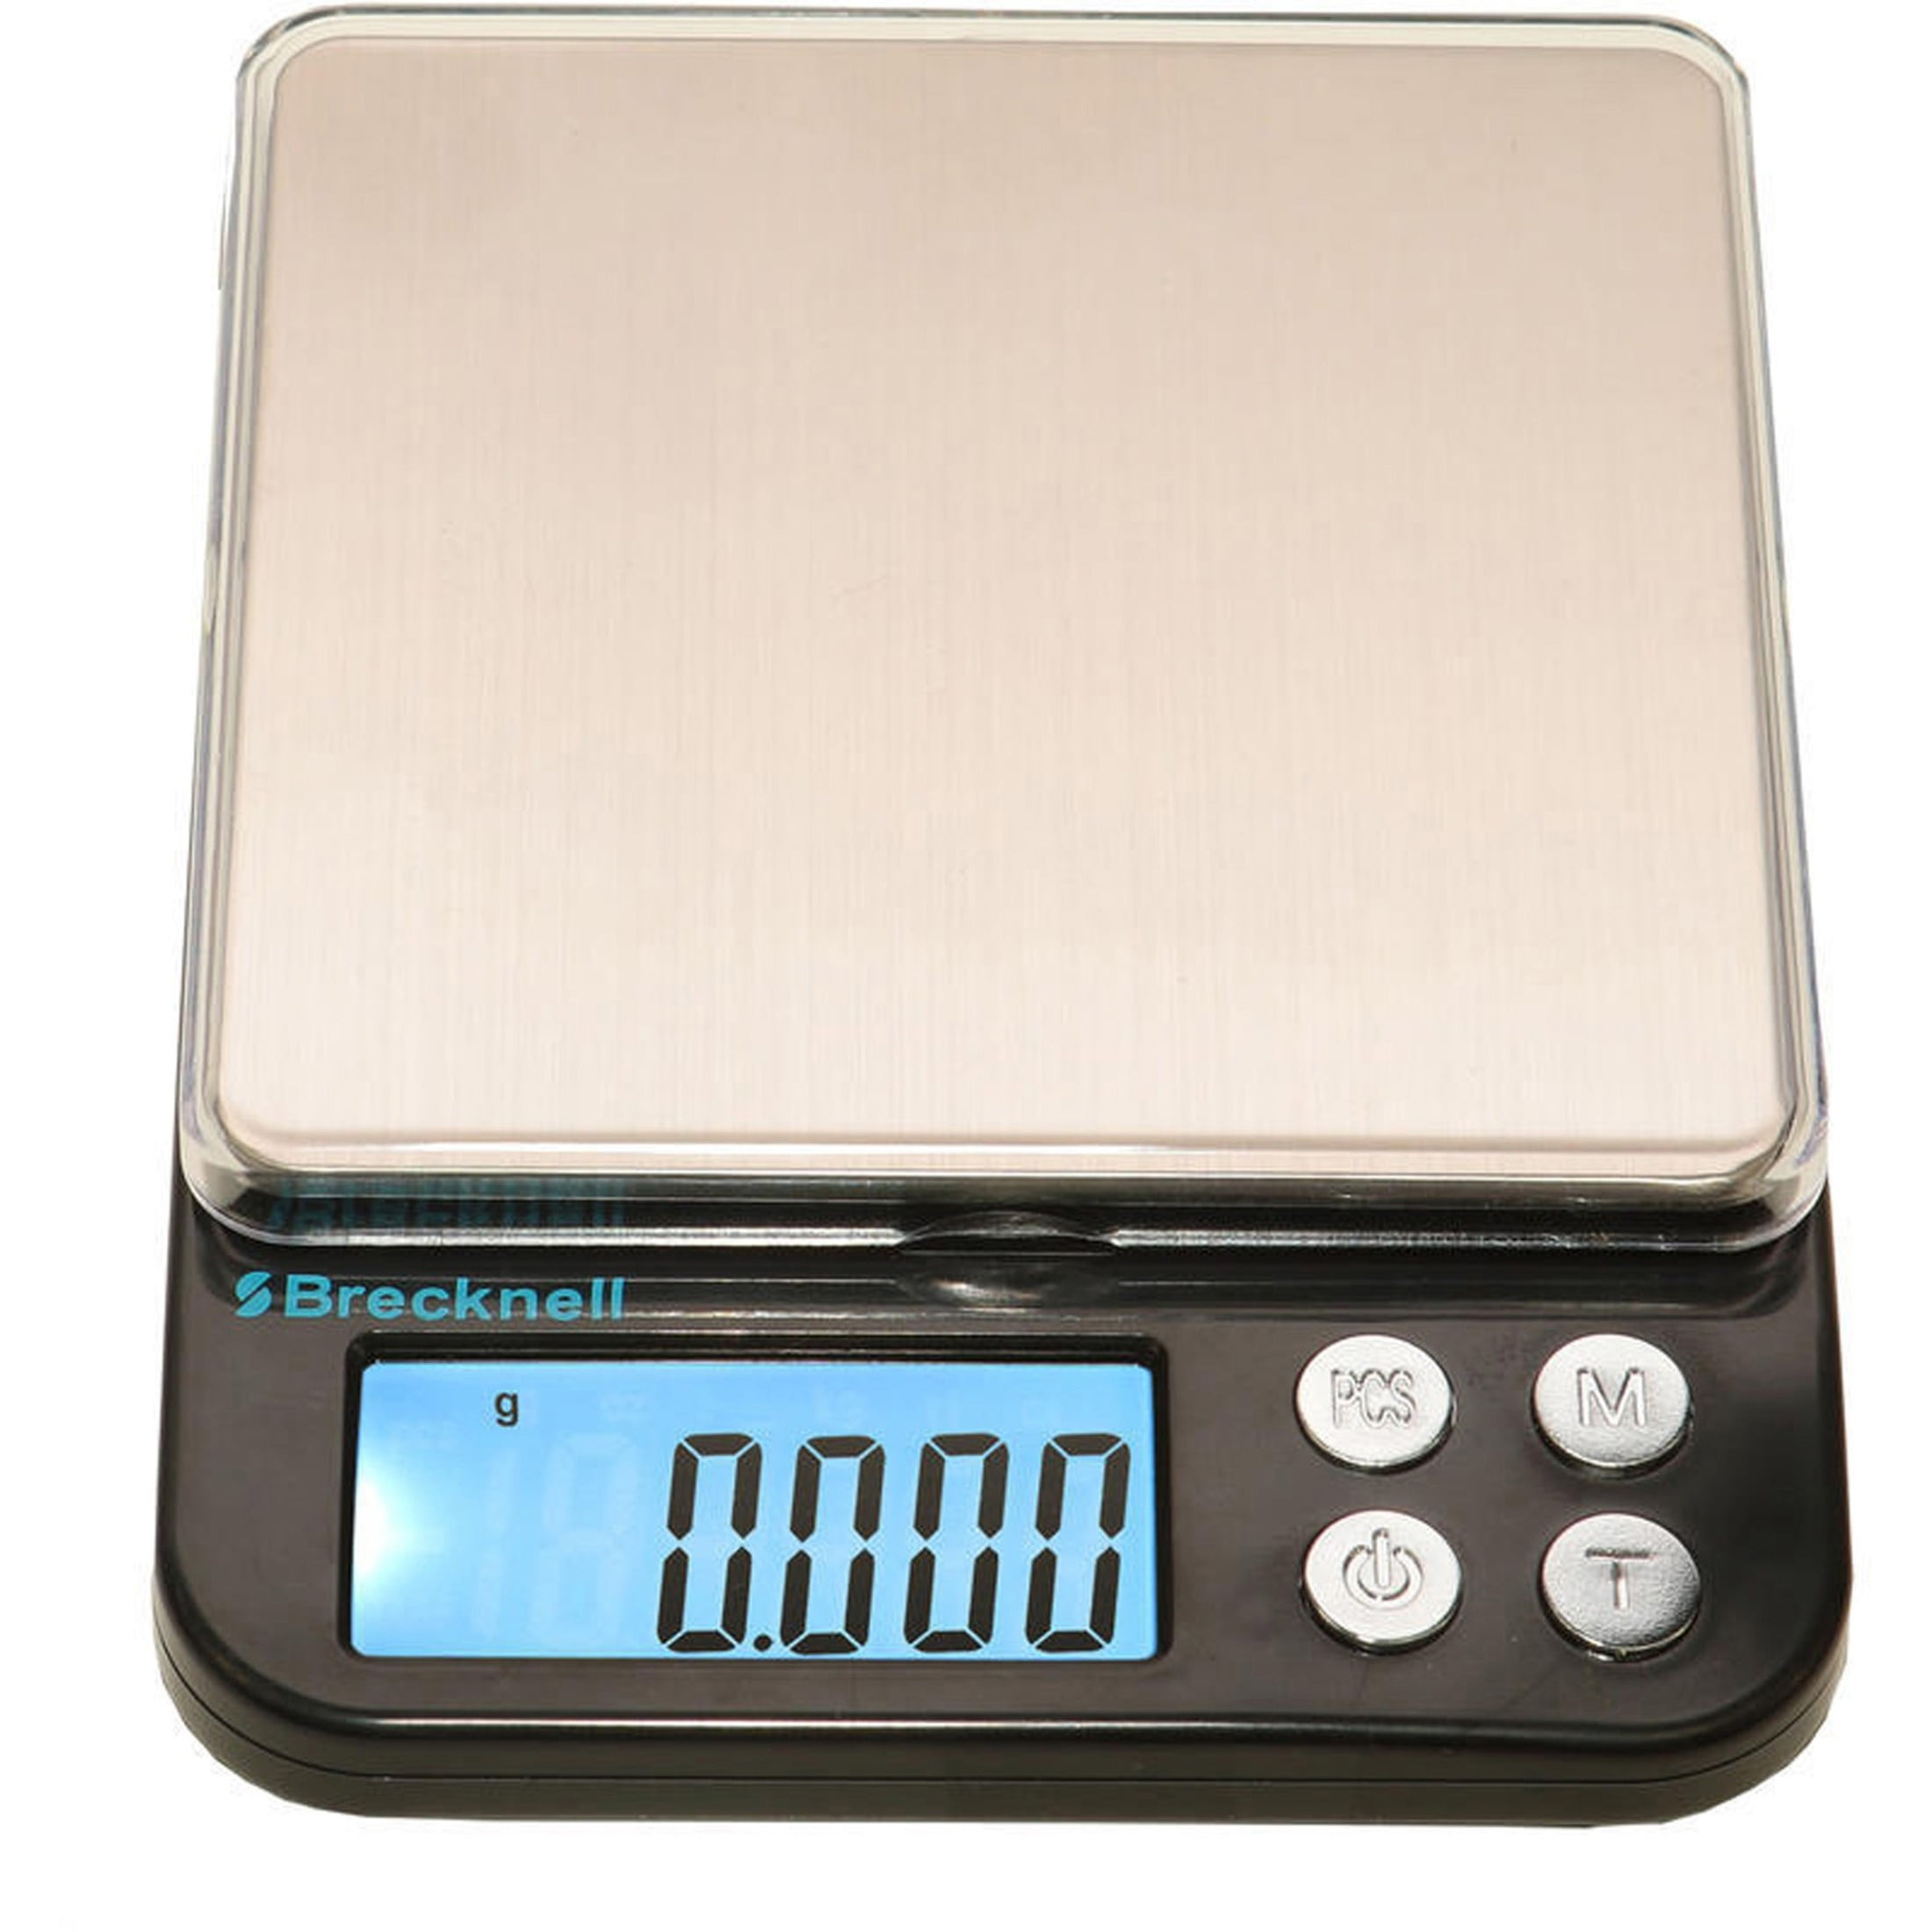 Sanitary Table Top Meat Scale